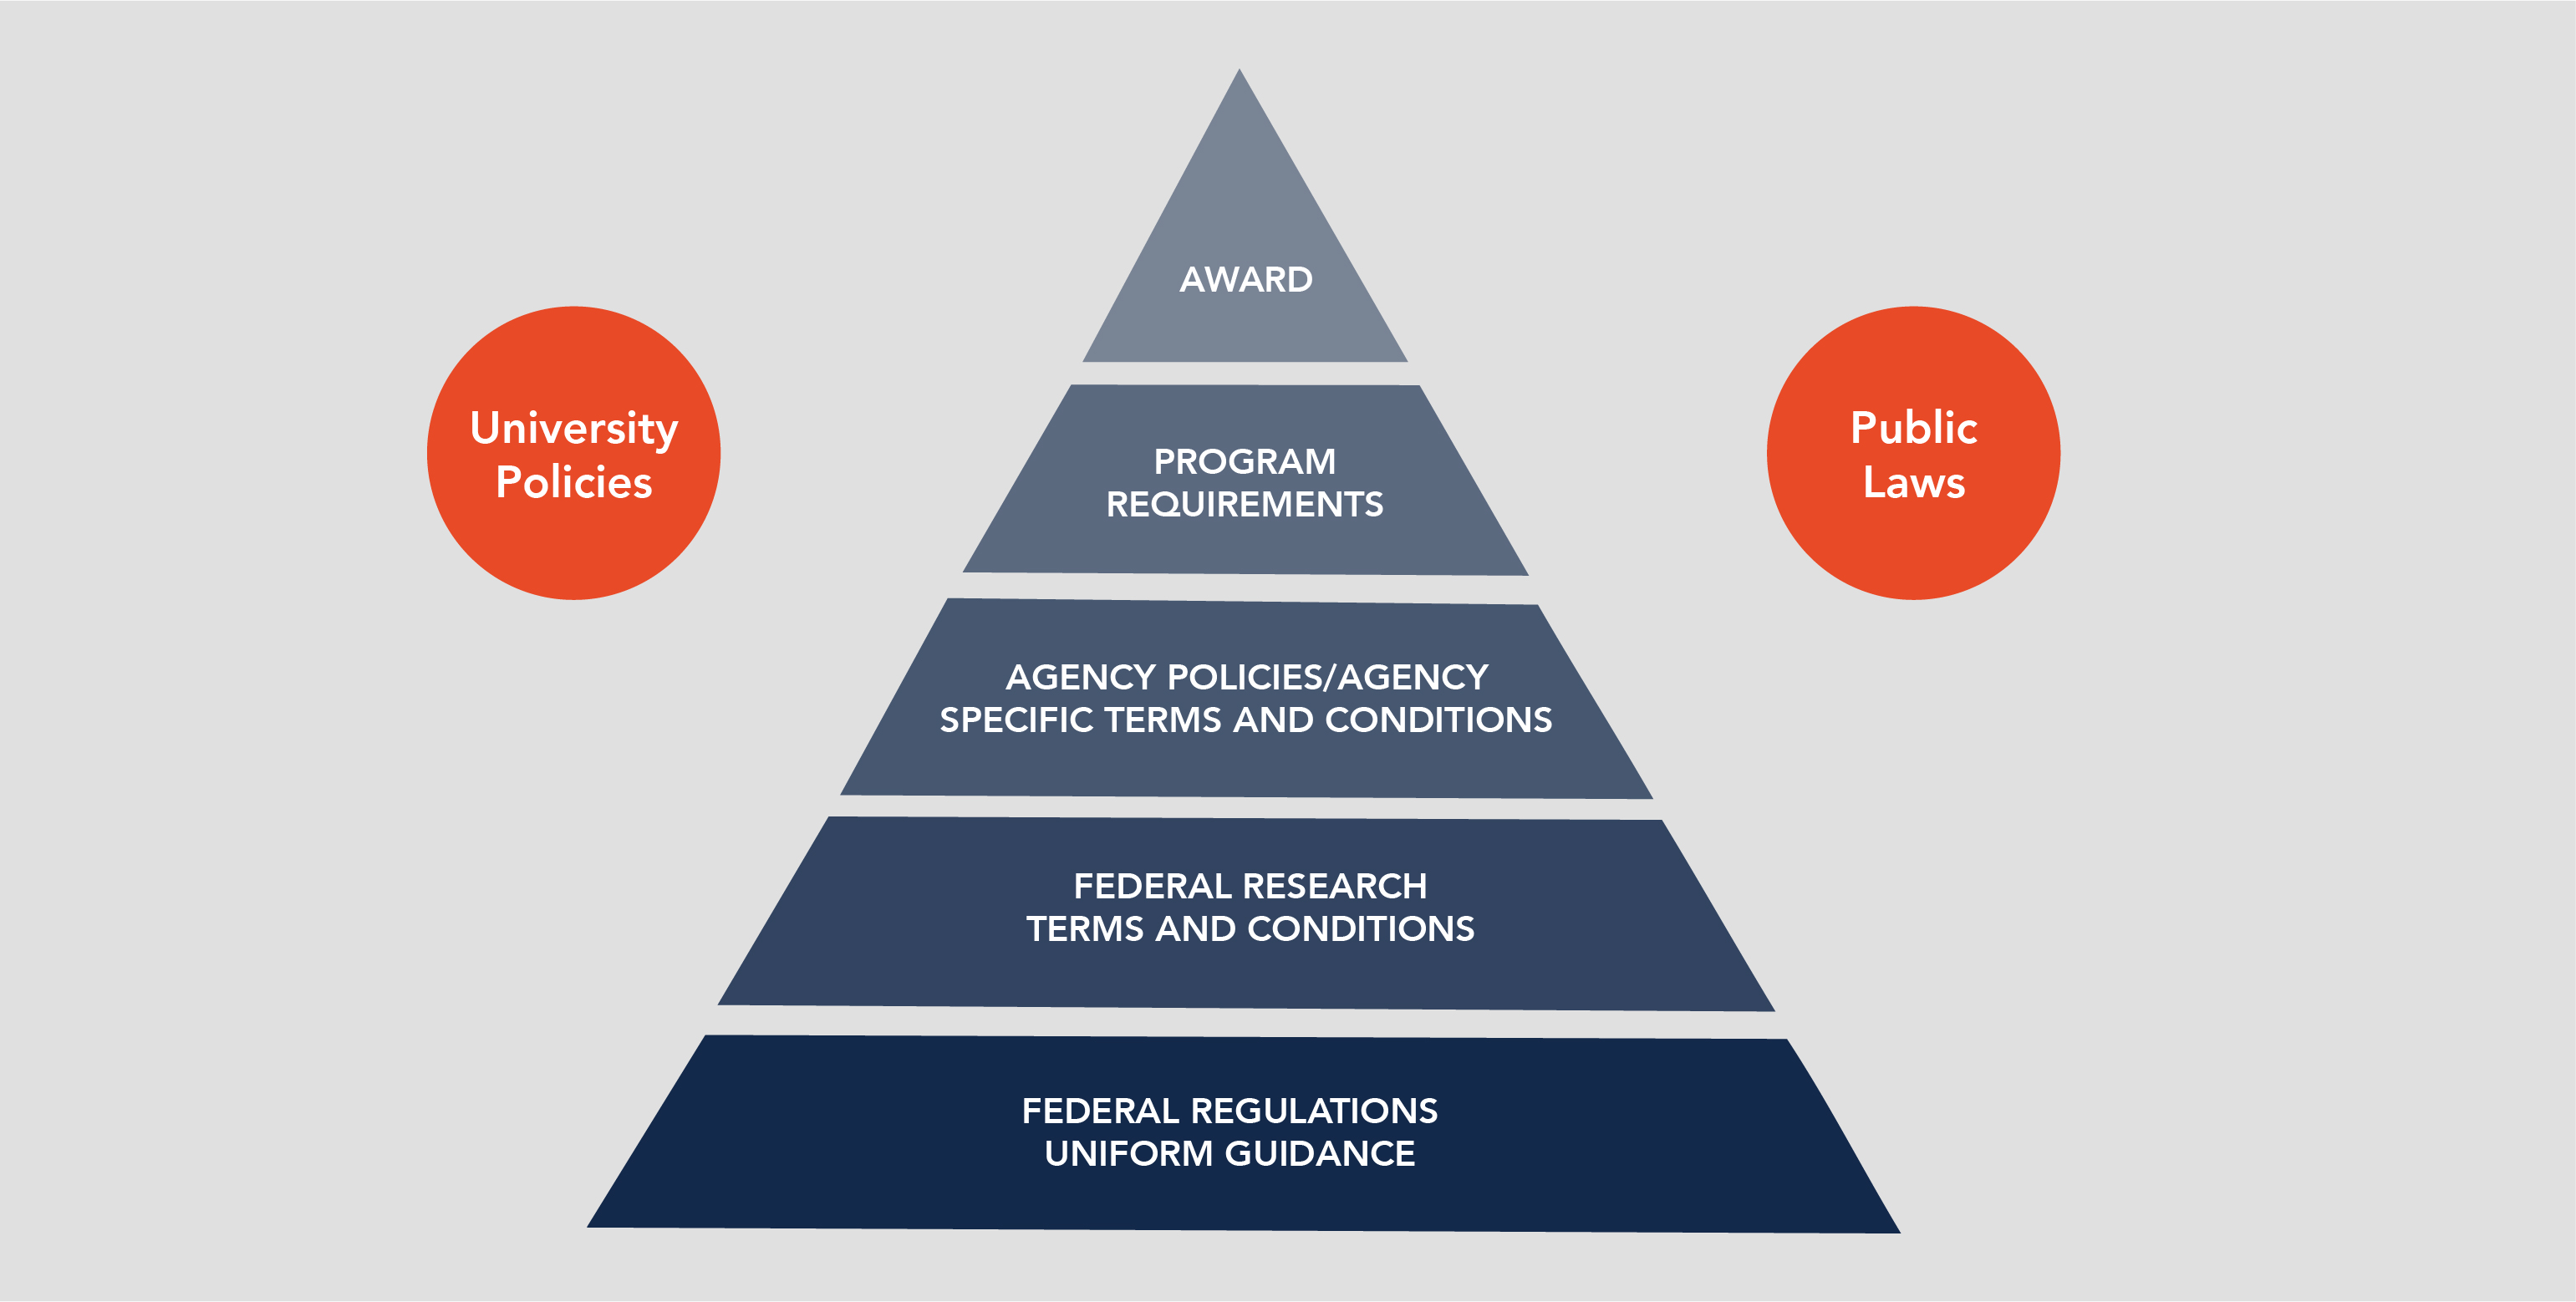 Cost Allowability Pyramid - Federal regulations base; Federal terms and conditions second from bottom; Agency Policies, terms and conditions next; Program requirements next; Award on top.  Two circles for university policies and public laws on sides.